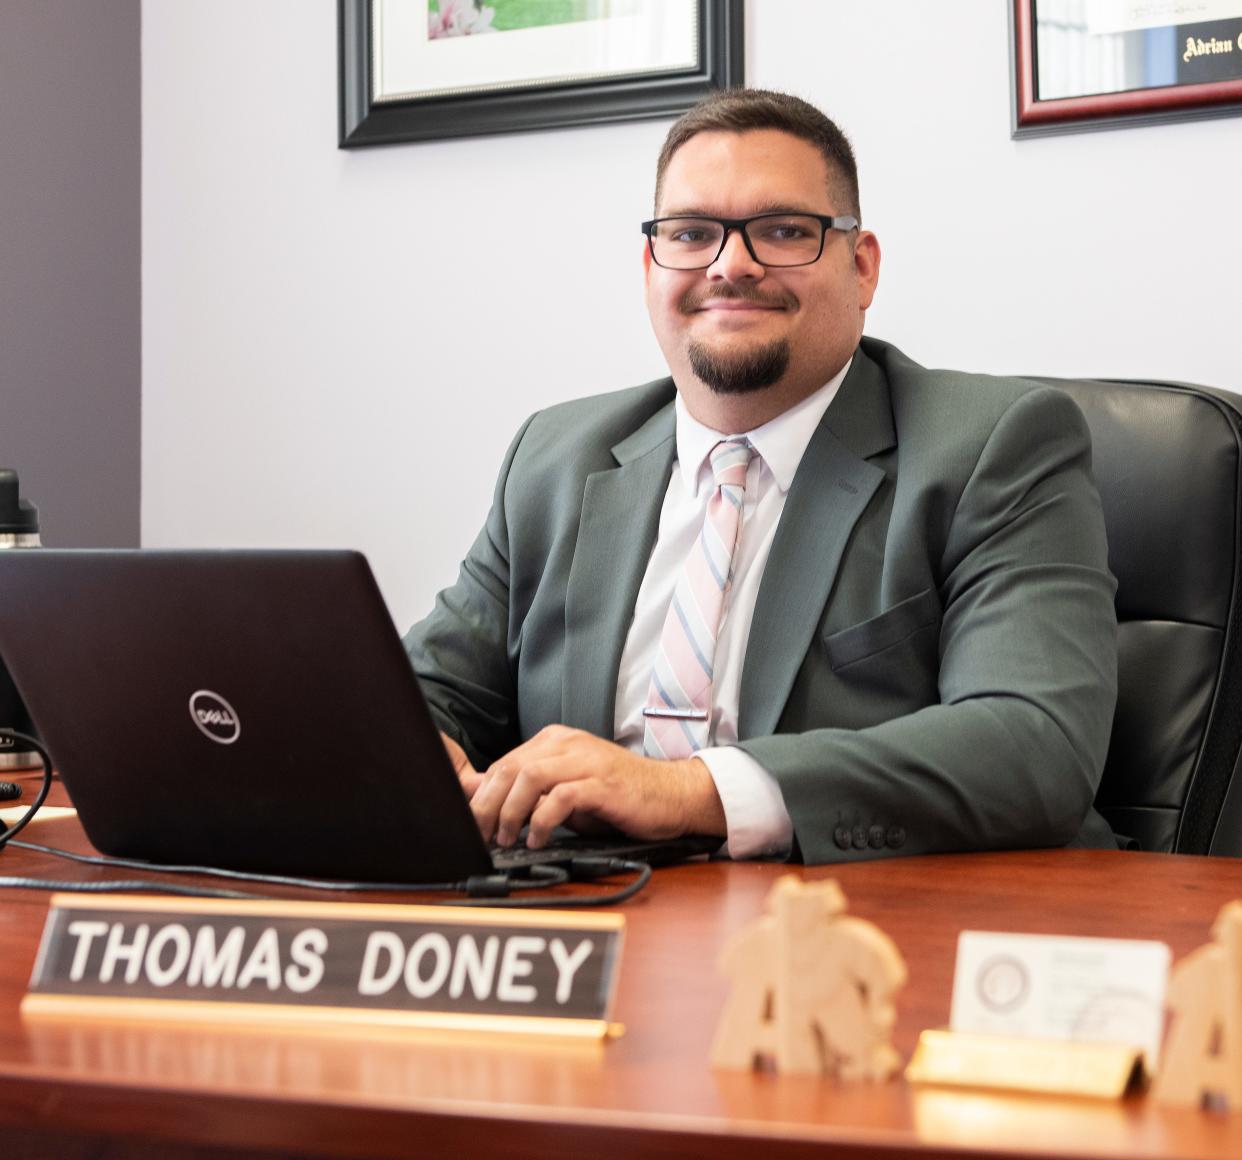 Adrian College has promoted its assistant dean of students, Thomas Doney, to the role dean of students. Doney is an alumnus from the college and has been working on campus since November 2018.